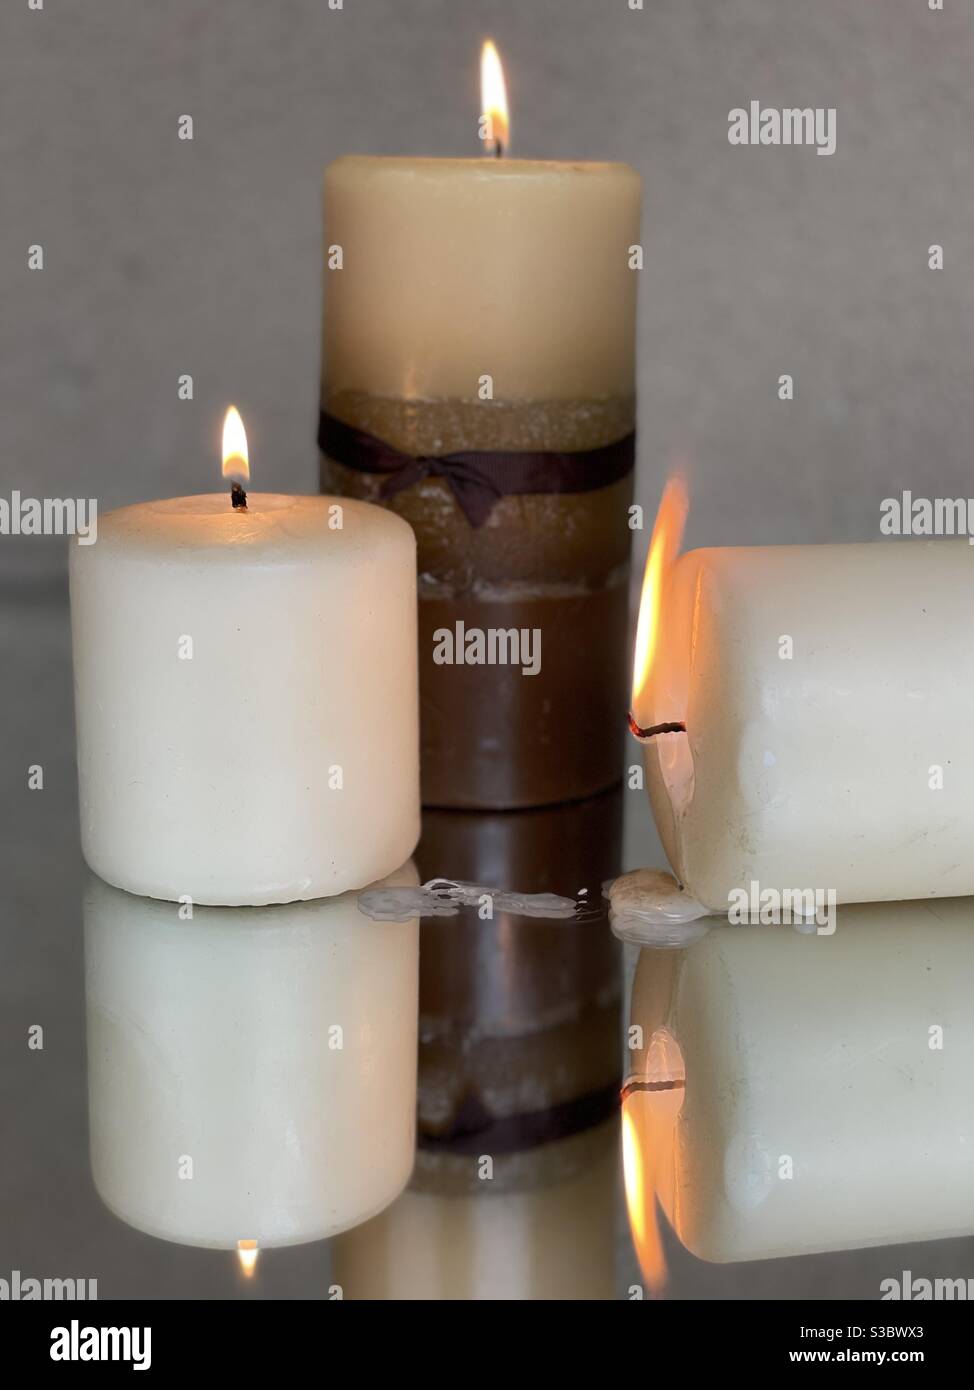 Three burning candles one turned sideways with wax dripping on mirrored surface Stock Photo